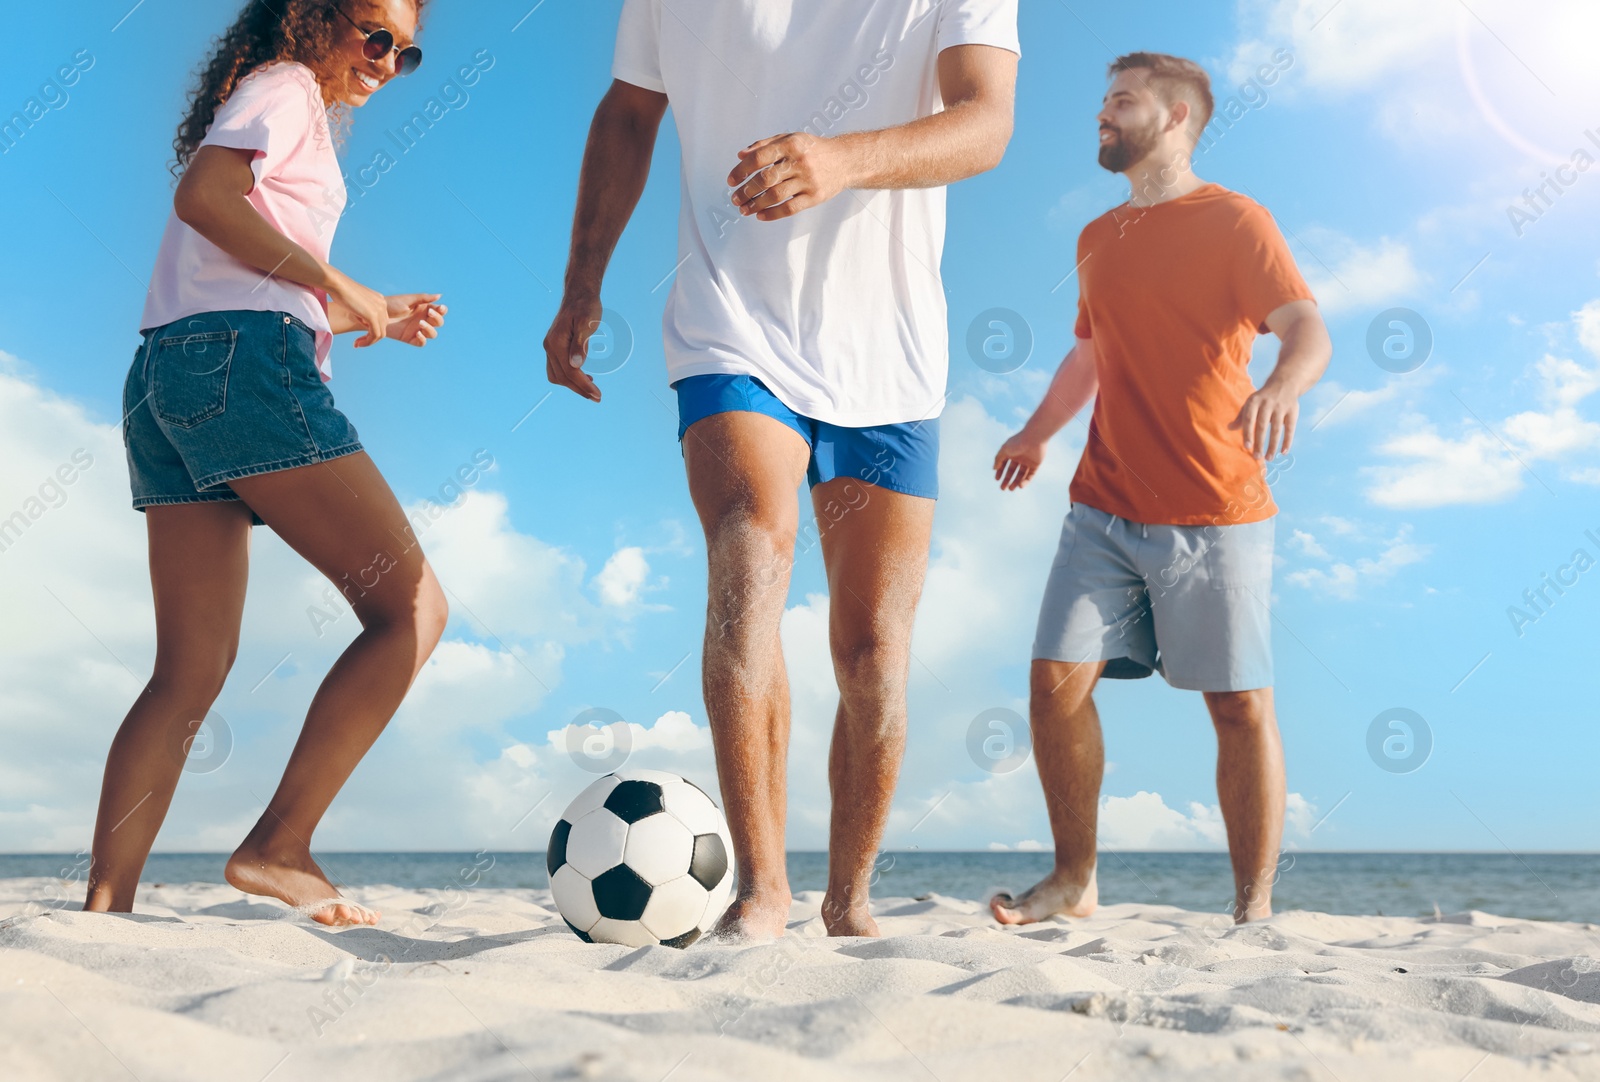 Image of Happy friends playing football on beach during sunny day, low angle view